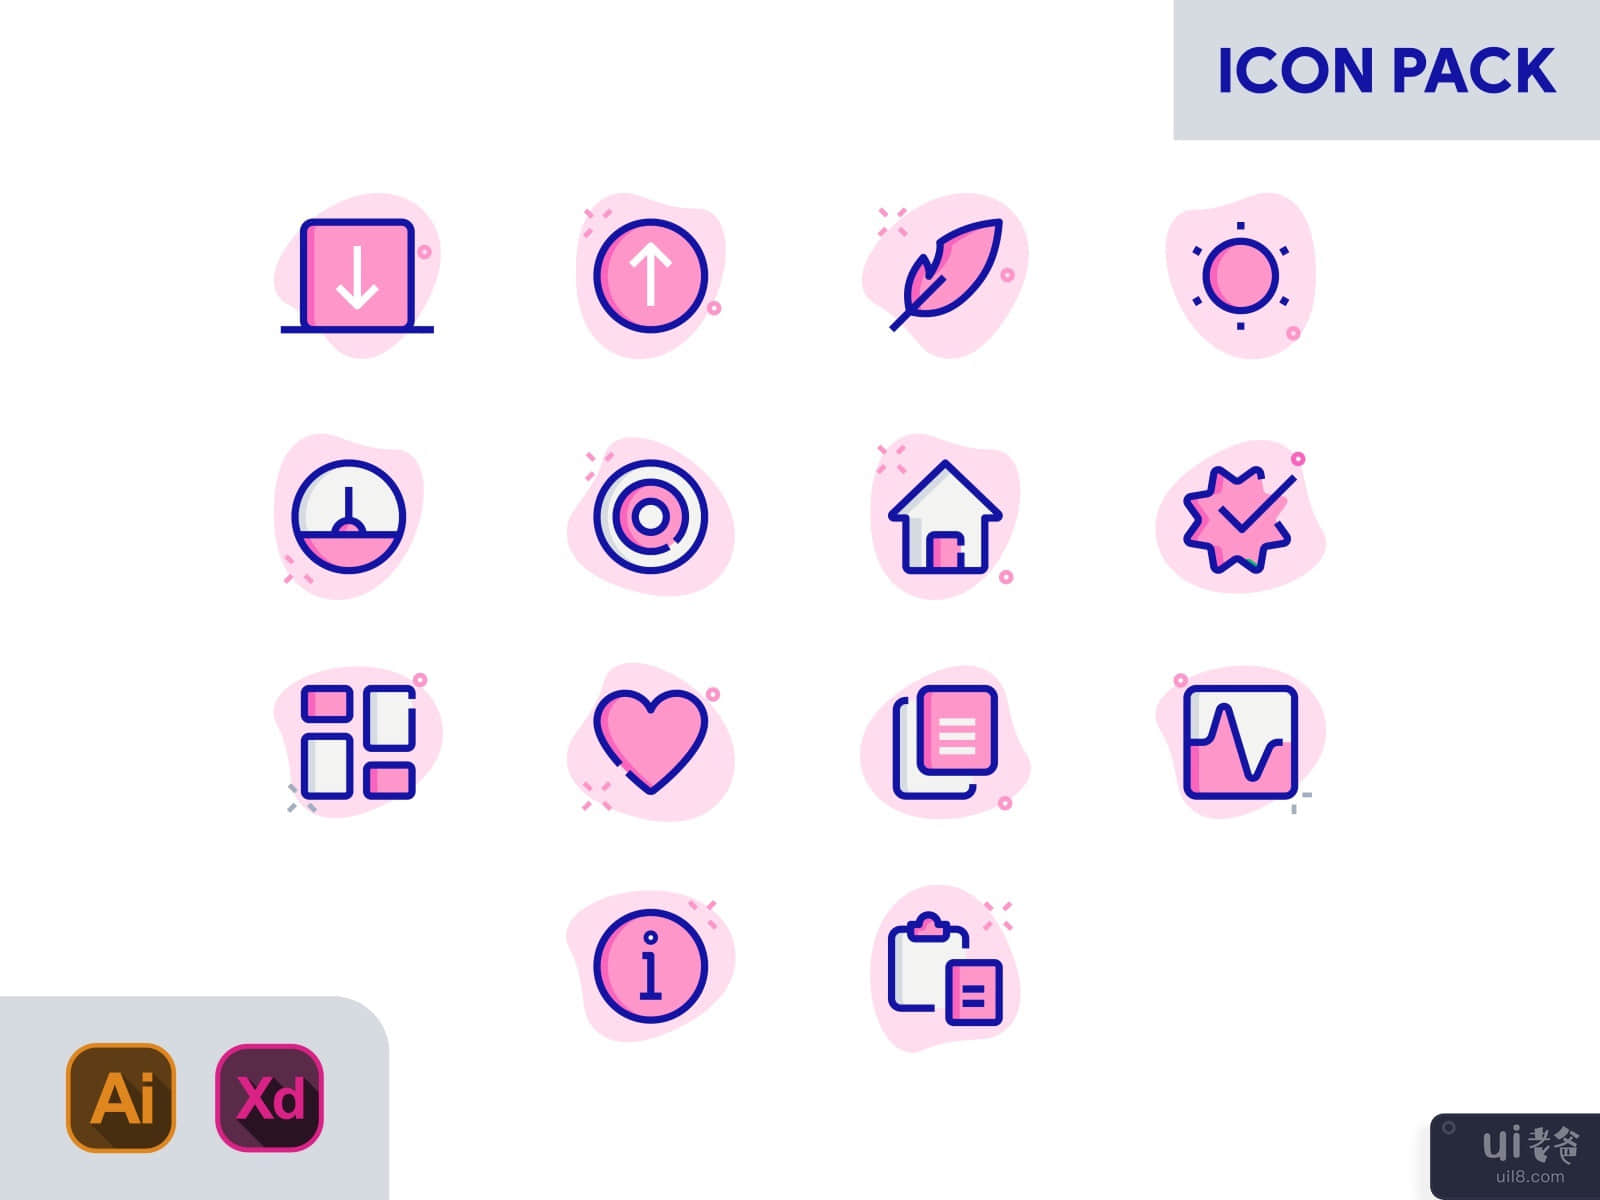 PINK & BLUE ICON PACK